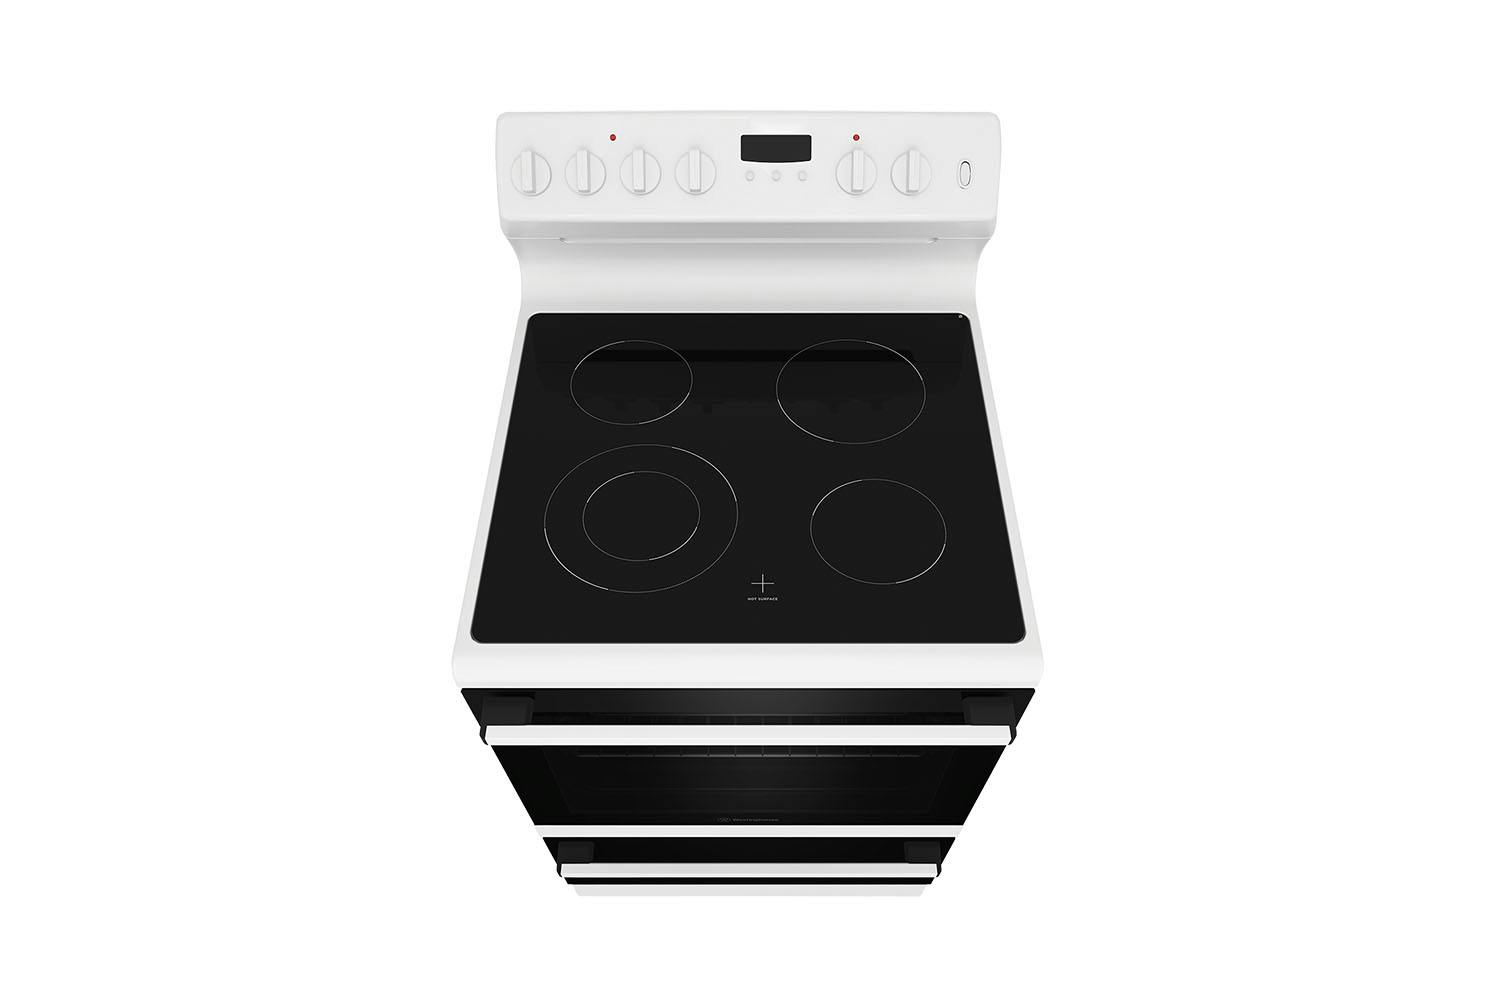 Westinghouse 60cm Freestanding Oven With Ceramic Cooktop